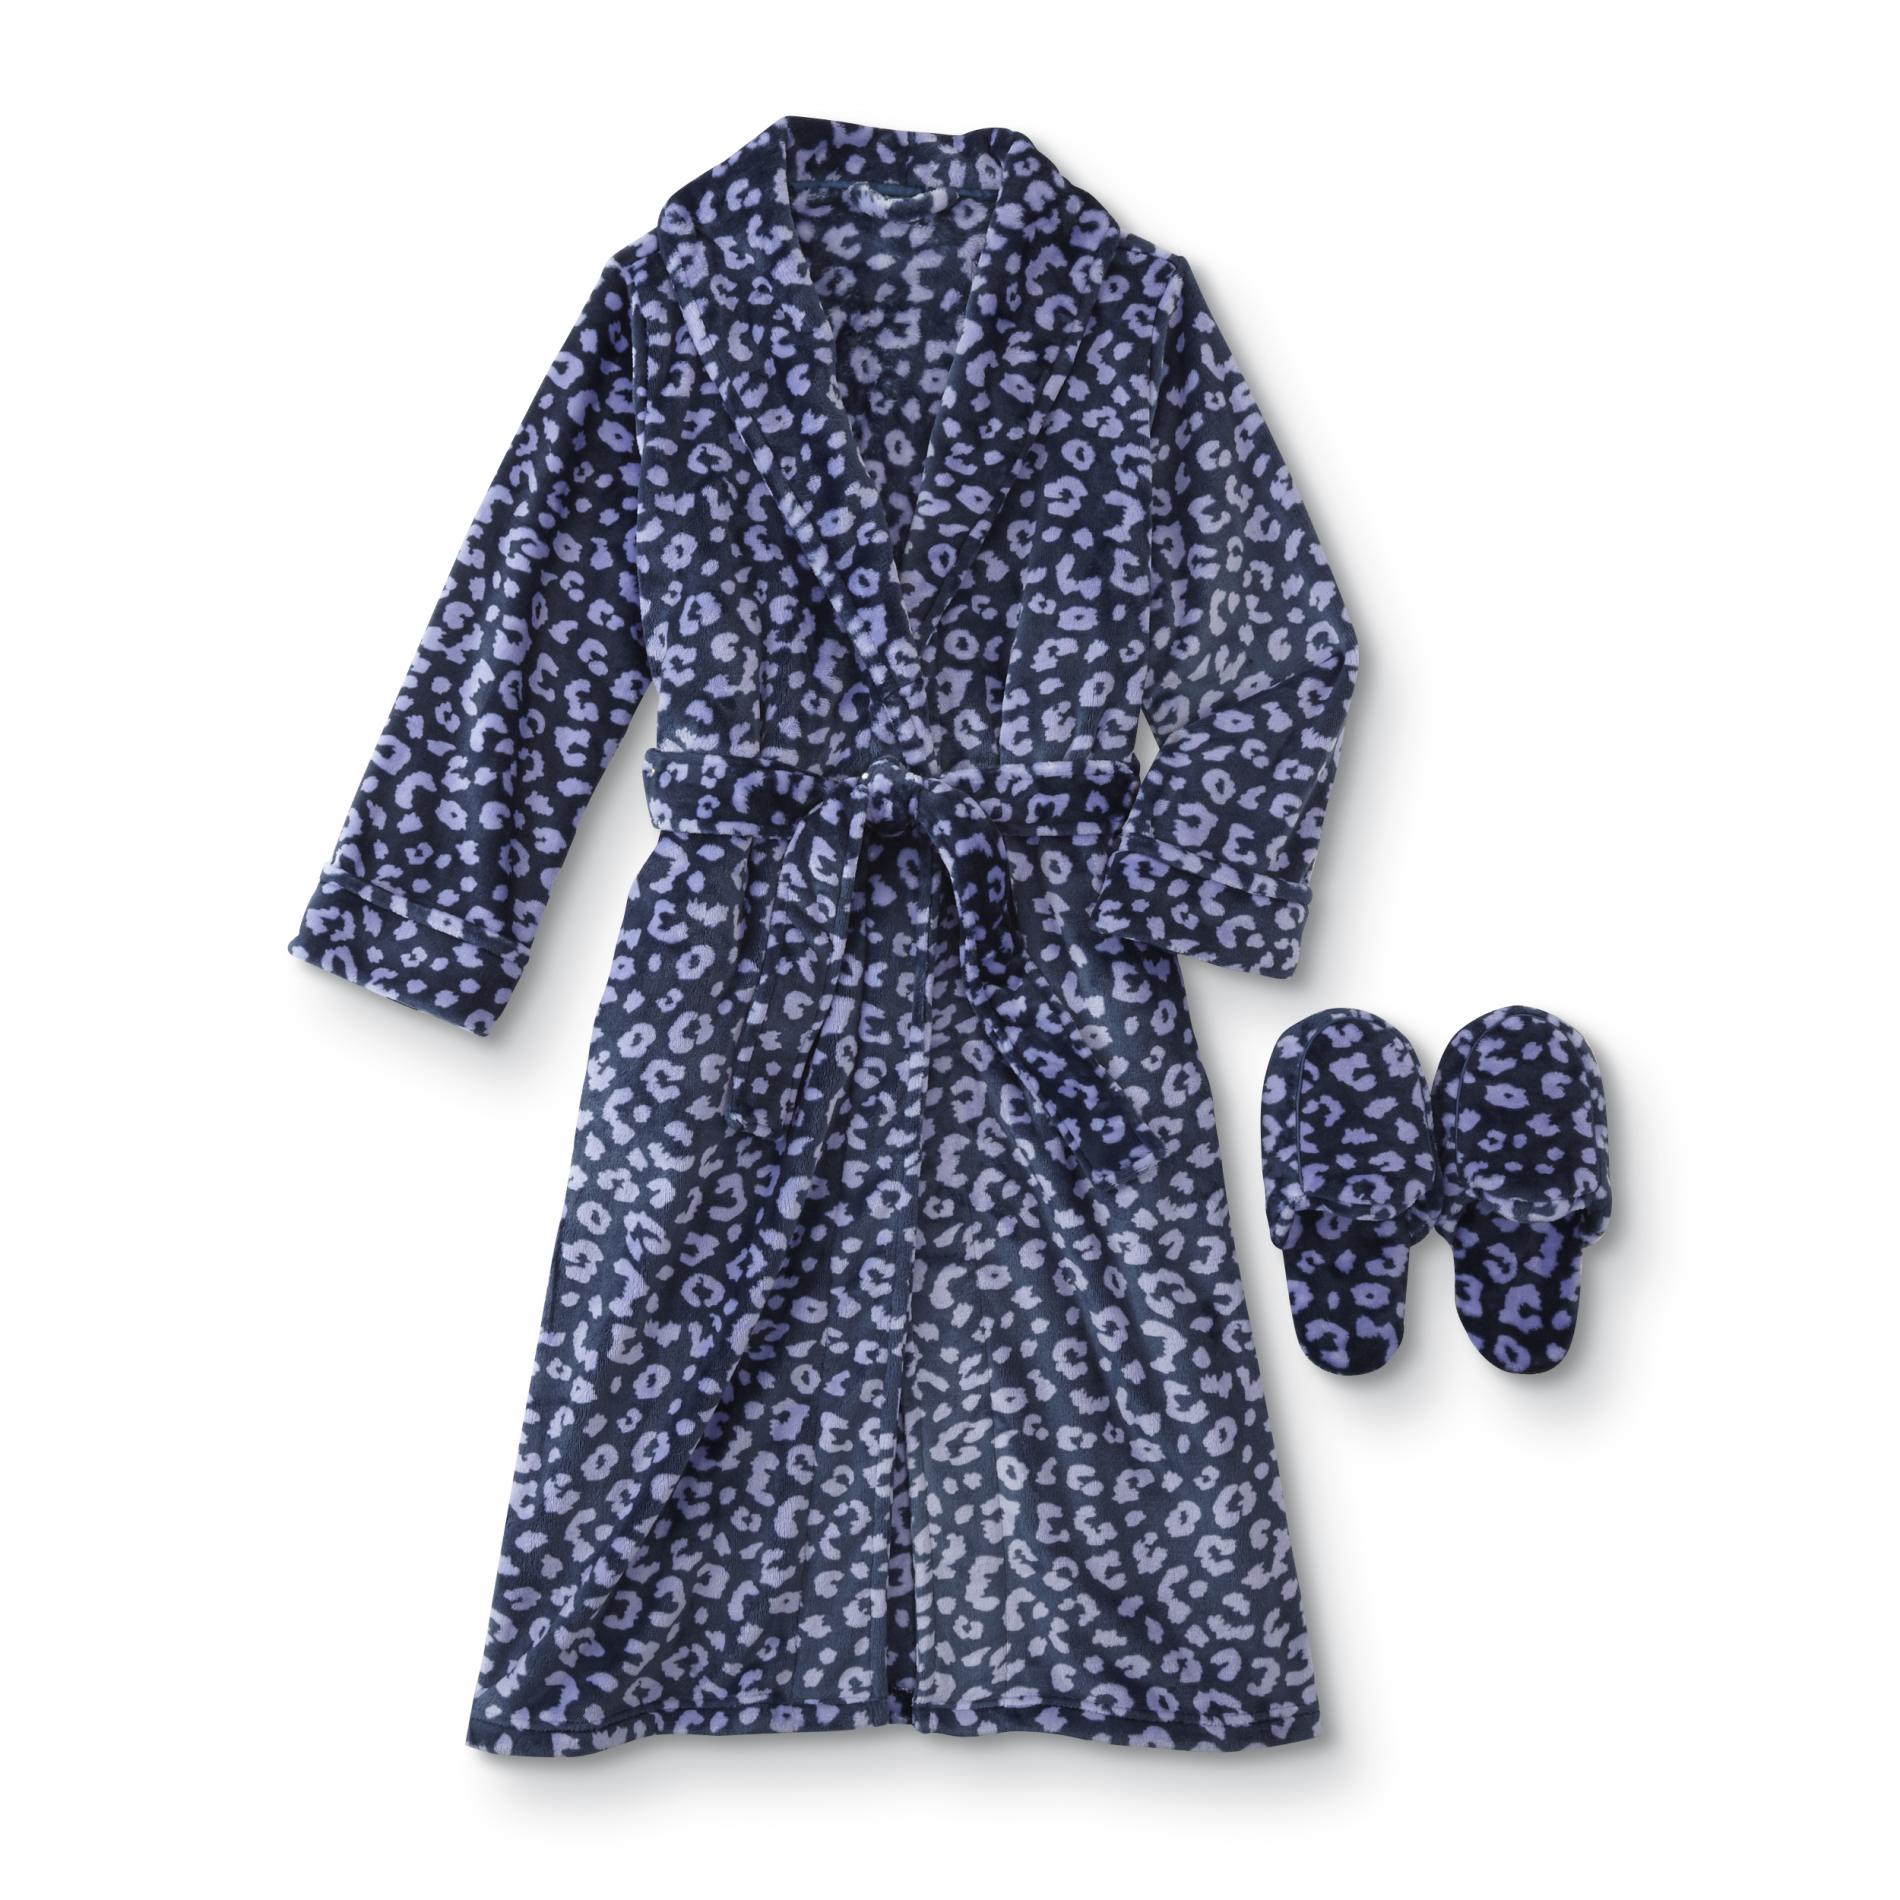 Simply Styled Women's Plush Robe & Slippers